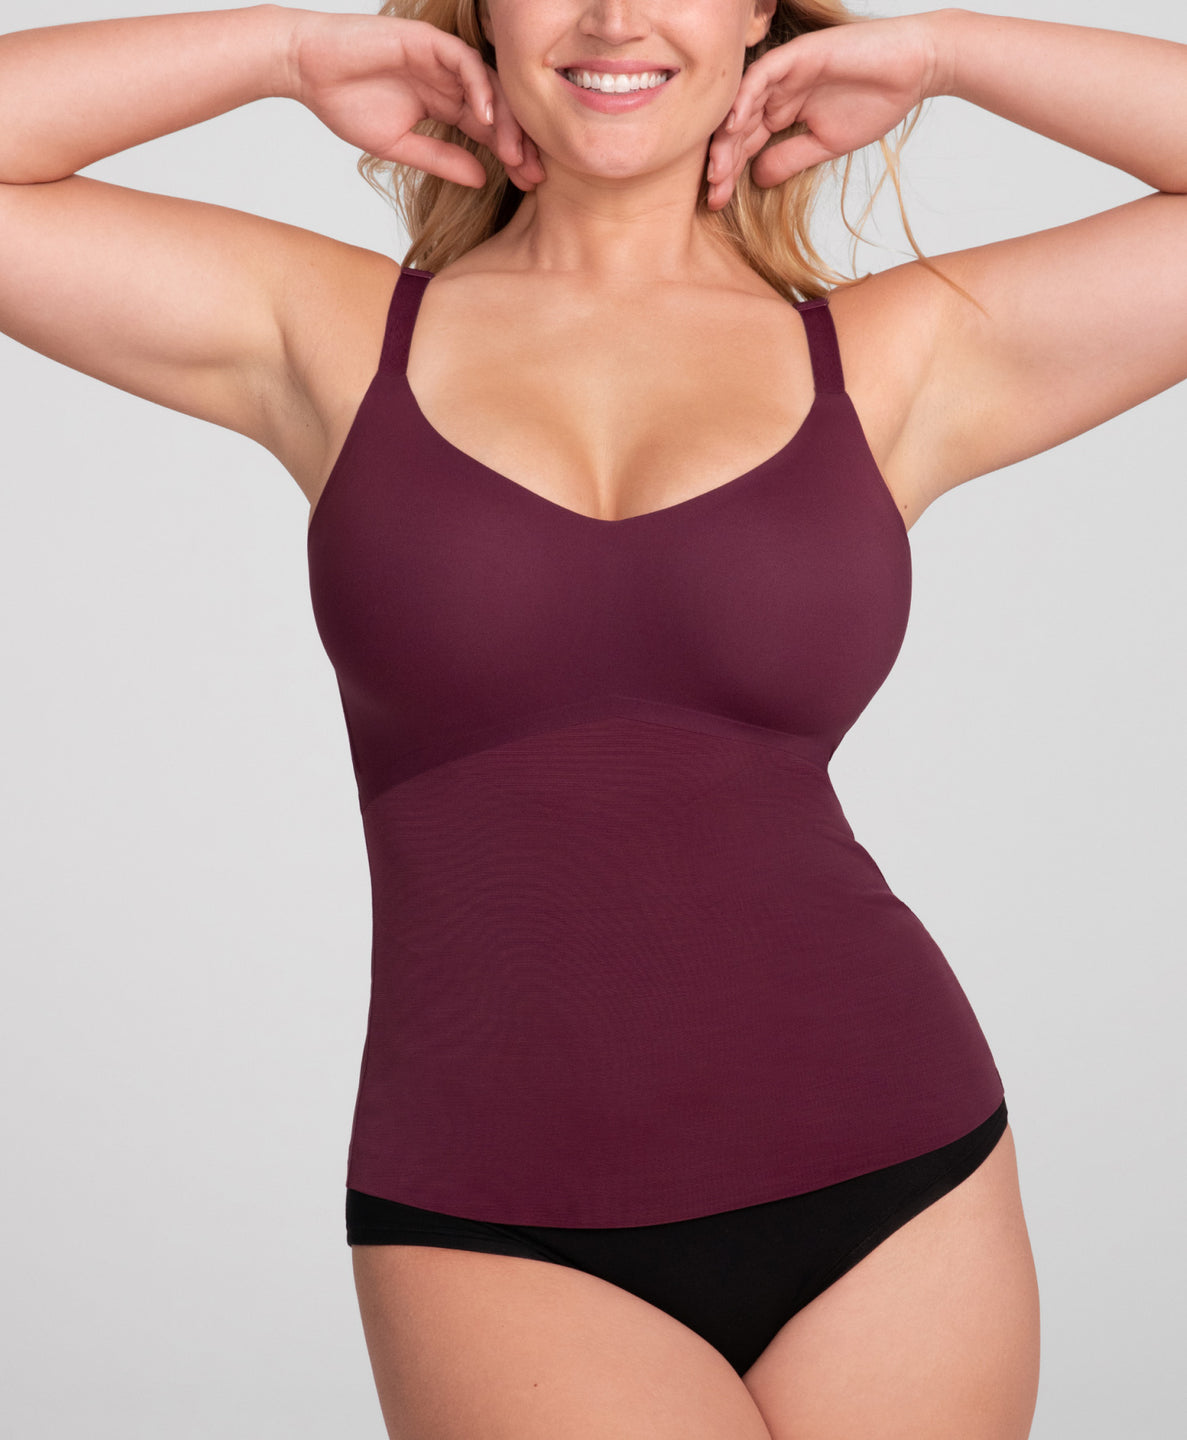 Honeylove LiftWear Vamp Black Smoothing Cami Top Size 3X NWT - $45 New With  Tags - From Lauren